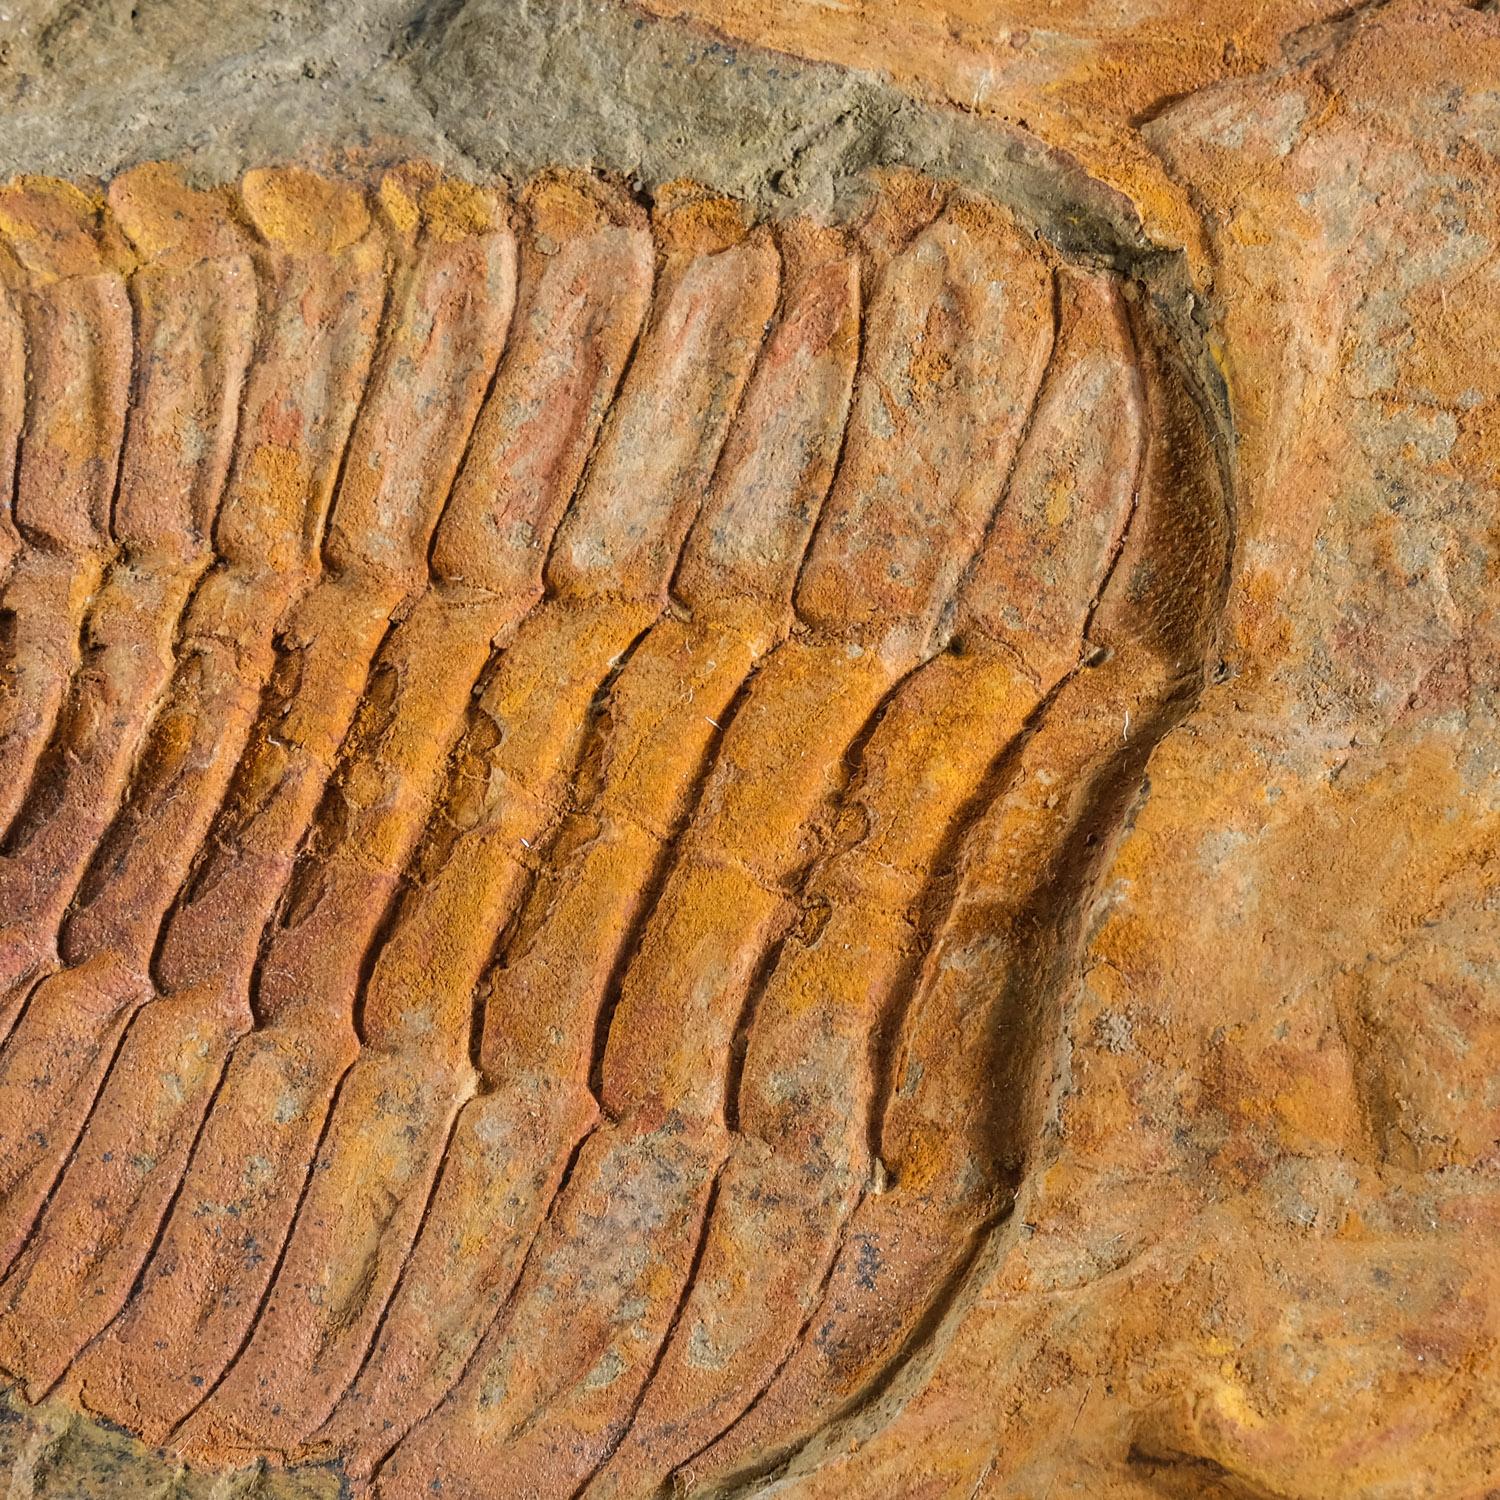 Ptychopariida is a large, heterogeneous order of trilobite containing some of the most primitive species known. The earliest species occurred in the second half of the Lower Cambrian period. Trilobites have facial sutures that run along the margin